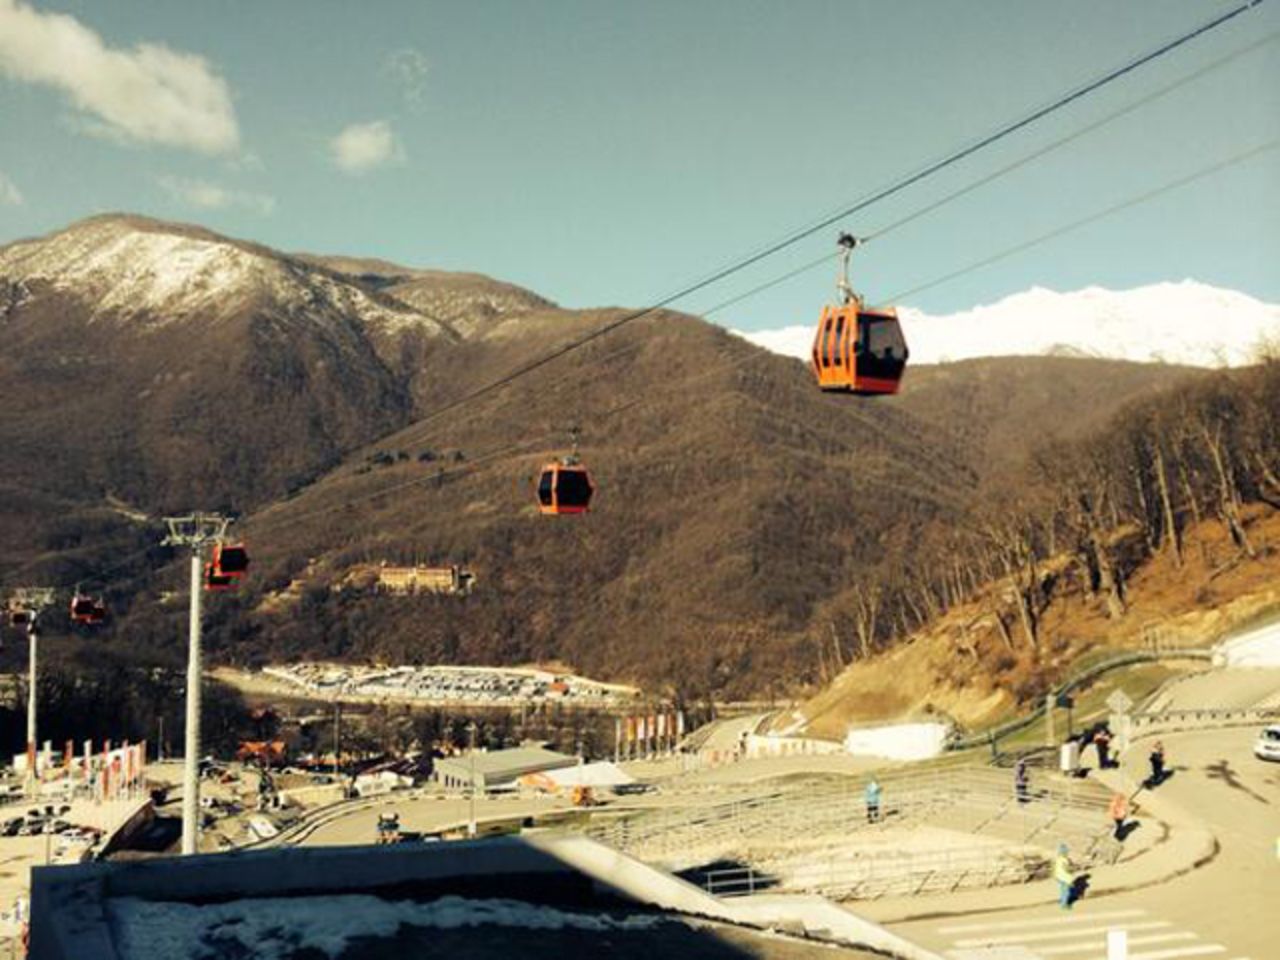 Don't believe everything you read and hear about Sochi. Here are two things that are working: the cable cars at the ski jump and 3G phone connection, even in the mountains.